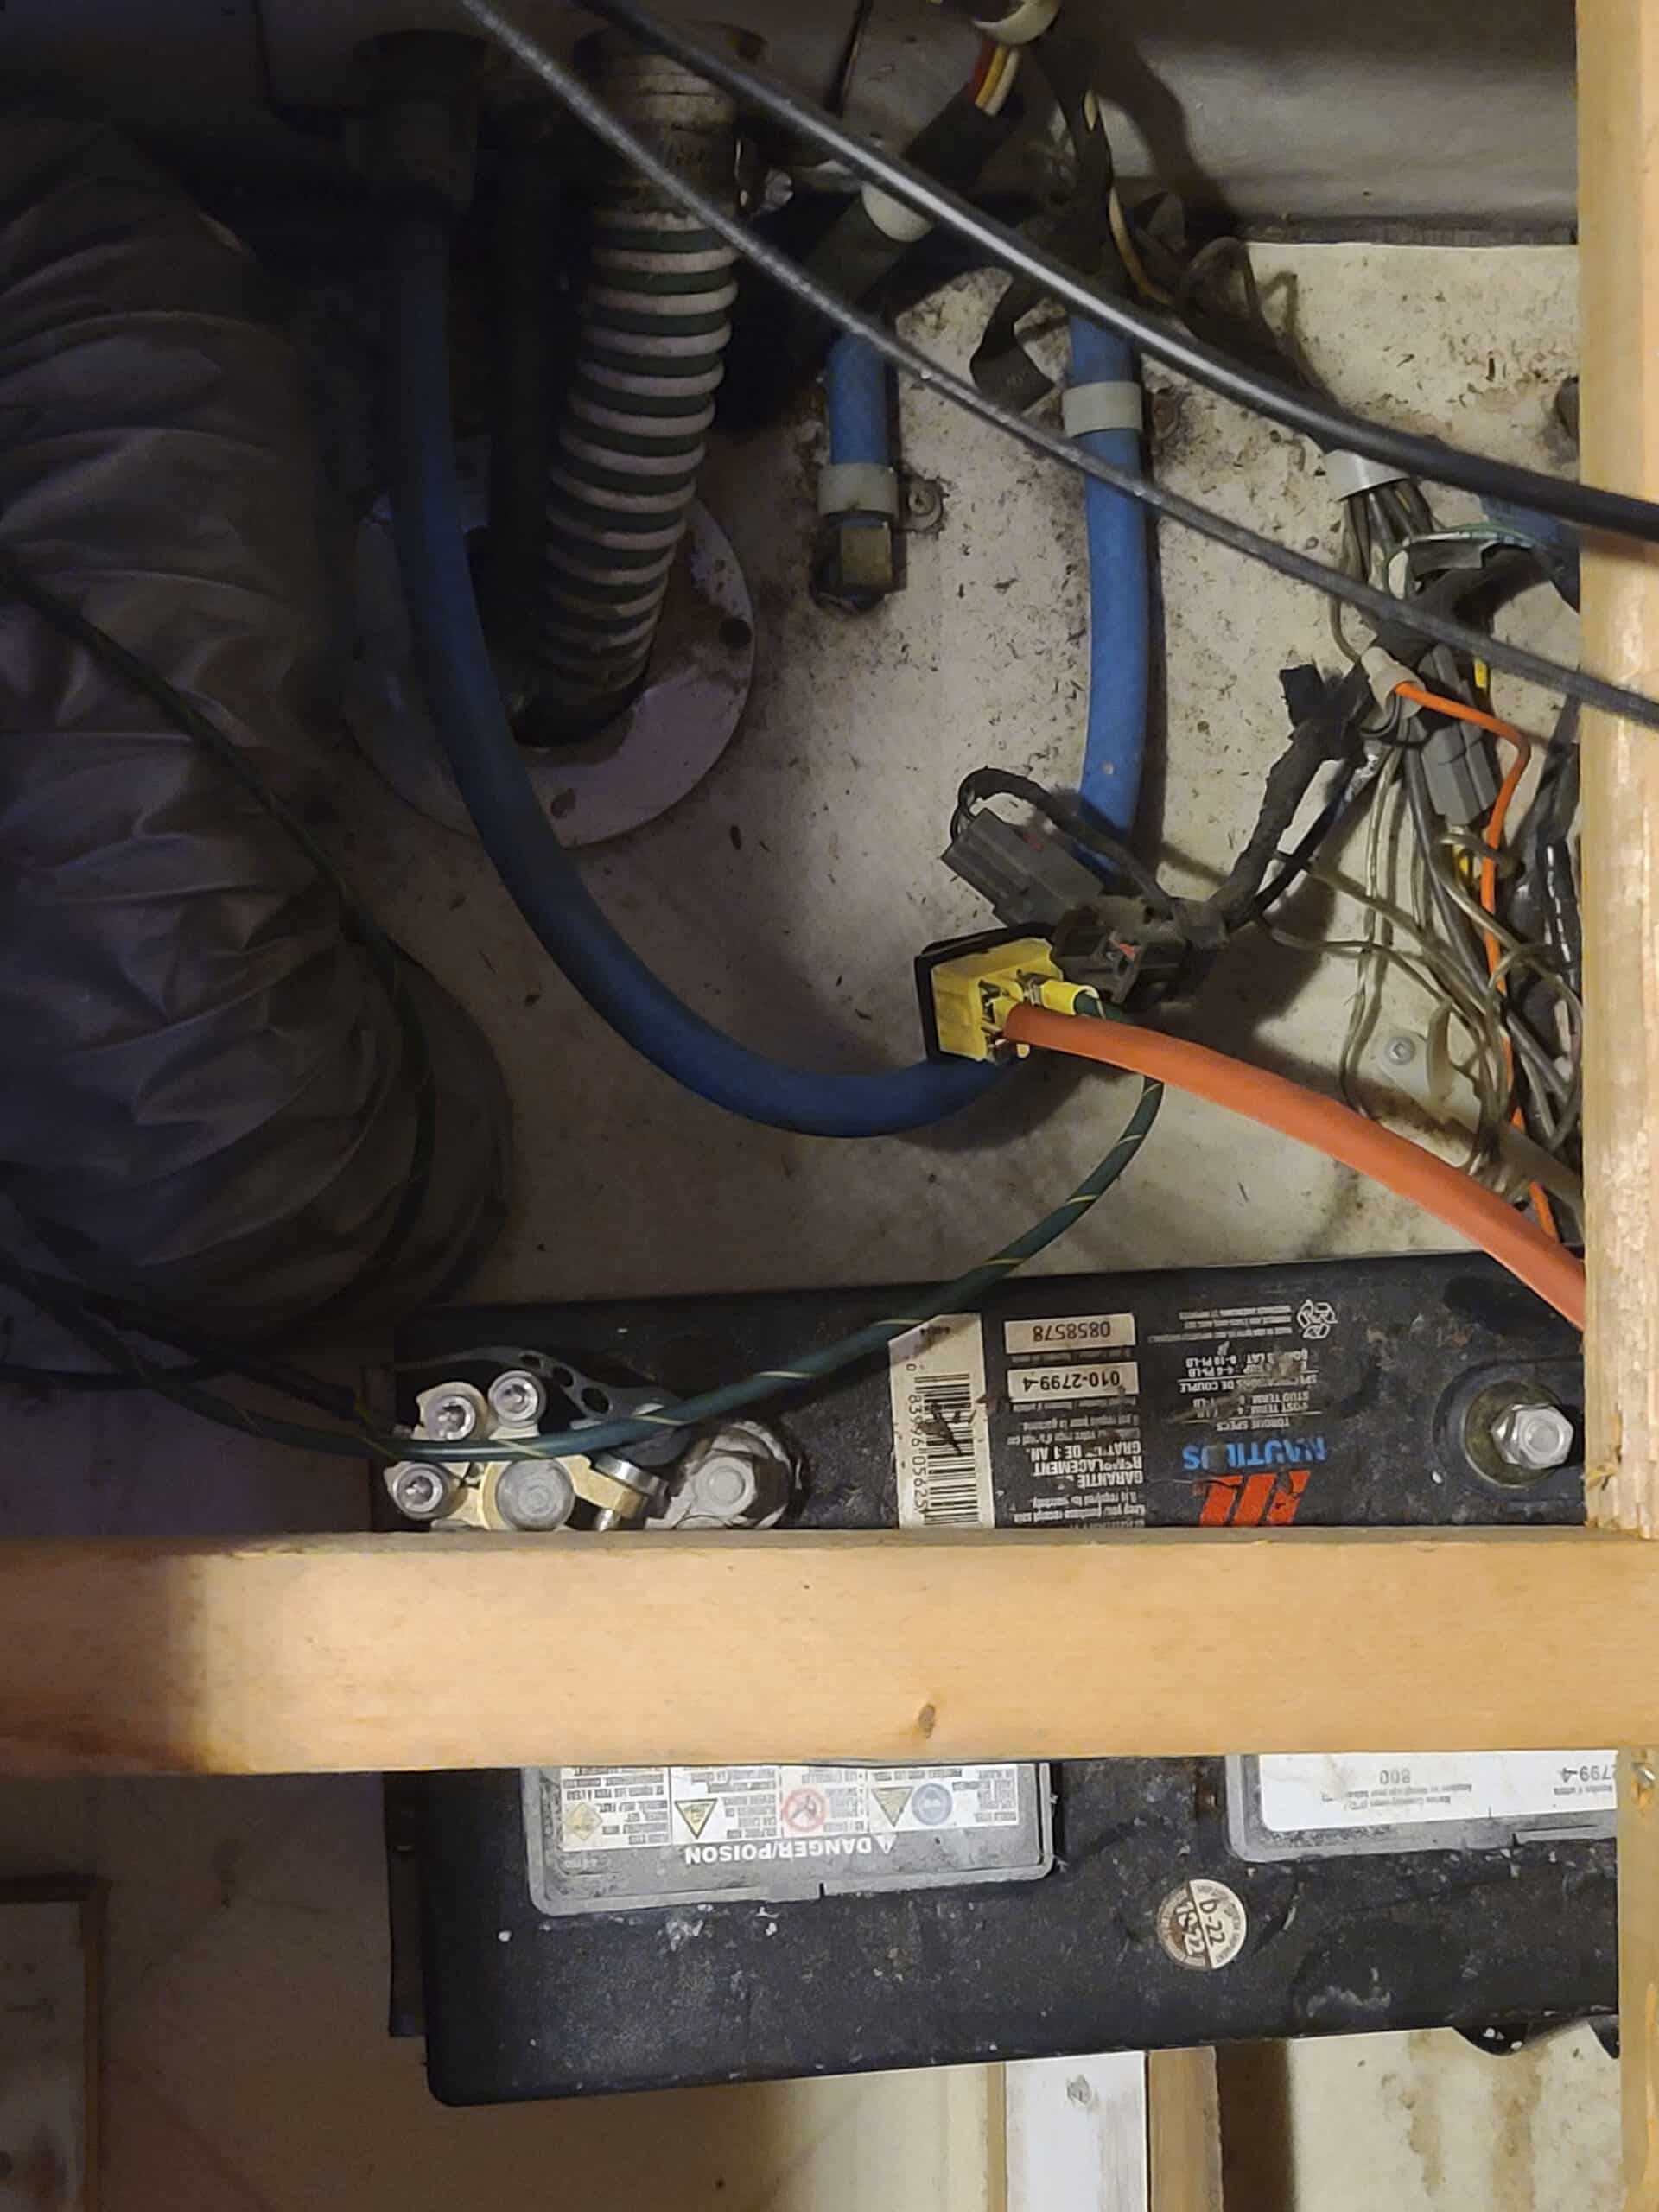 Under the seat of a motorhome, hoses and wires are seen, along with a deep cycle 12v battery.